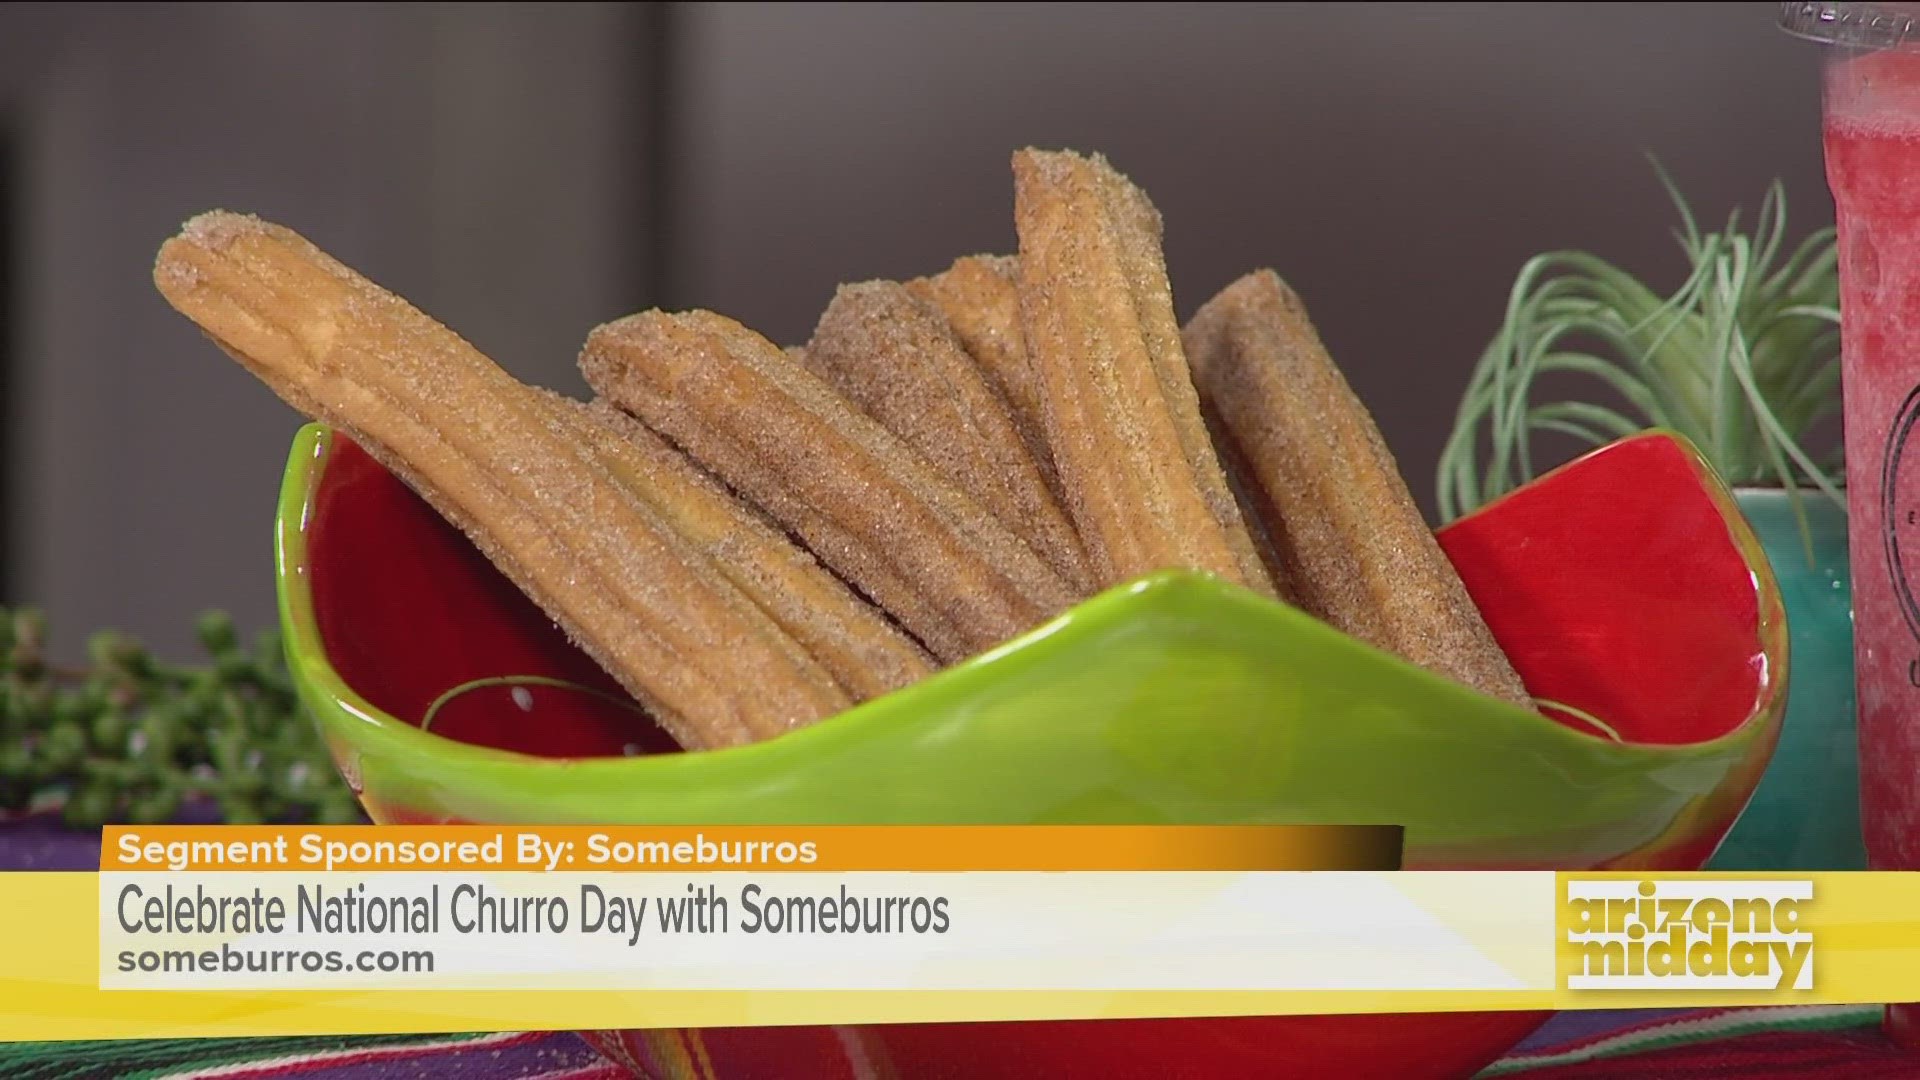 Danielle Dressor with Someburros tells us how we can get a free churro and enjoy other delicious eats - including a Father's Day special!